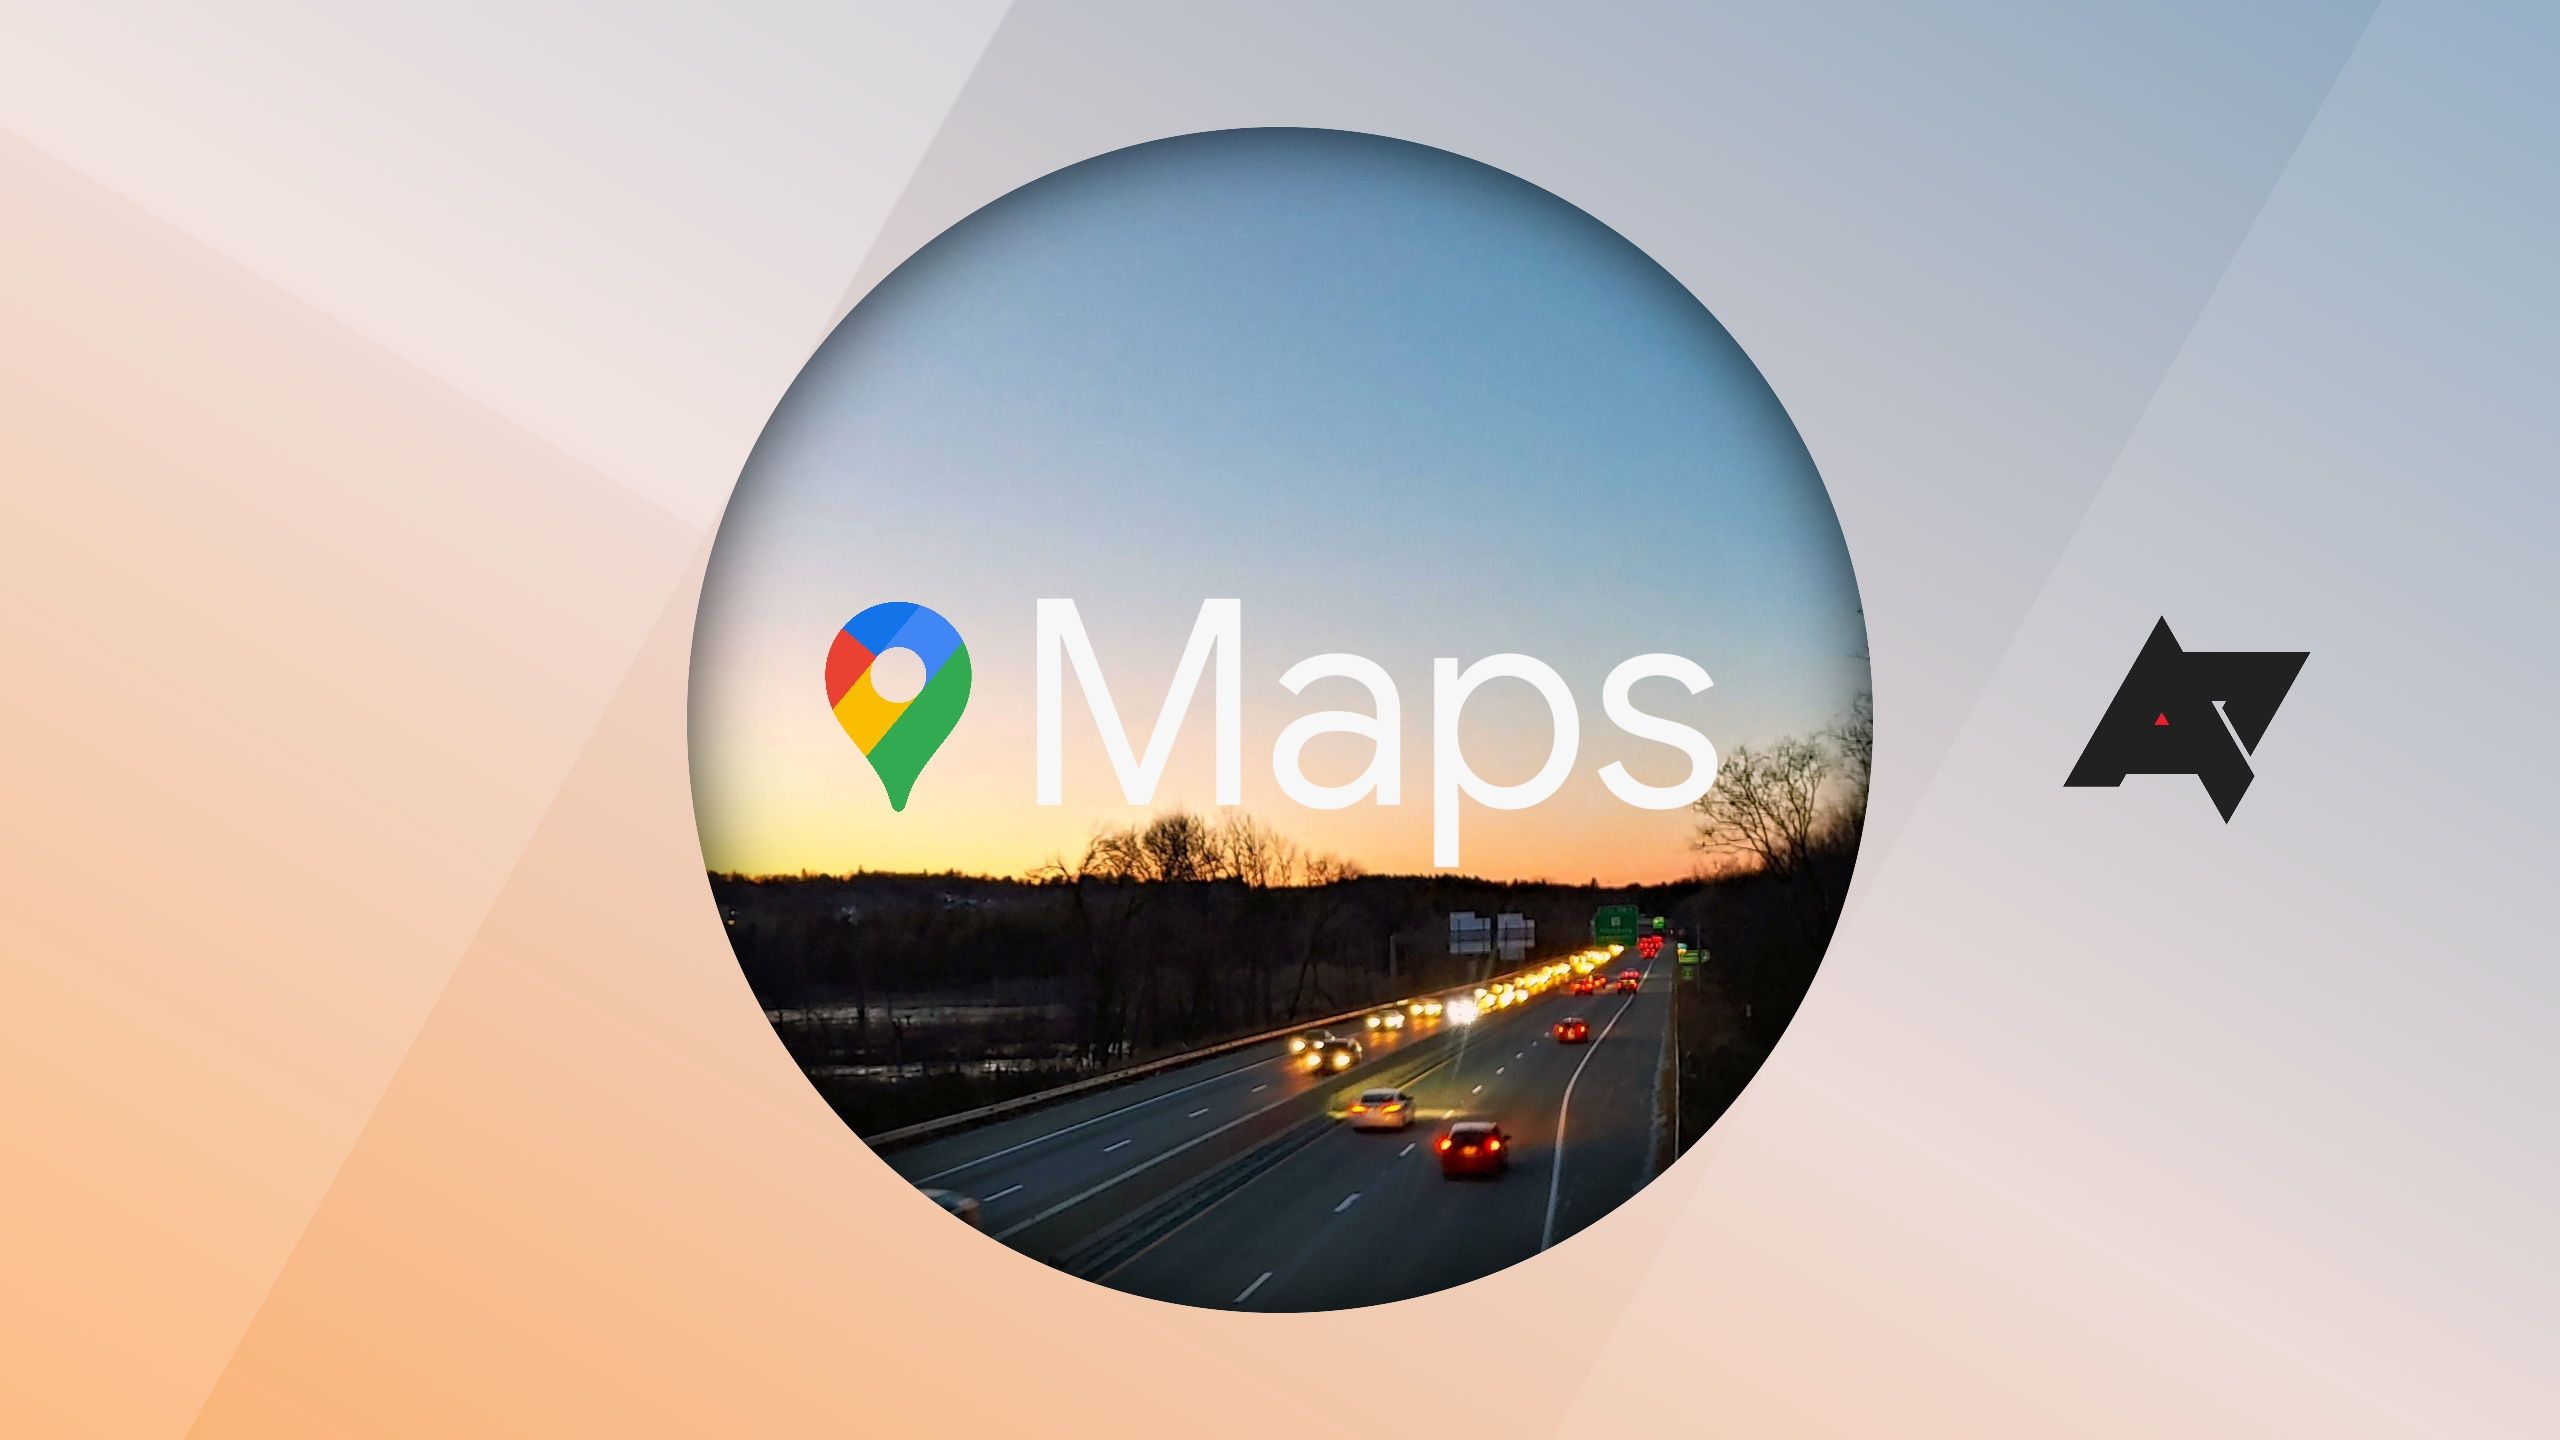 – “US Users Prefer Apple’s iOS, but Google Maps Stands Out for Navigation